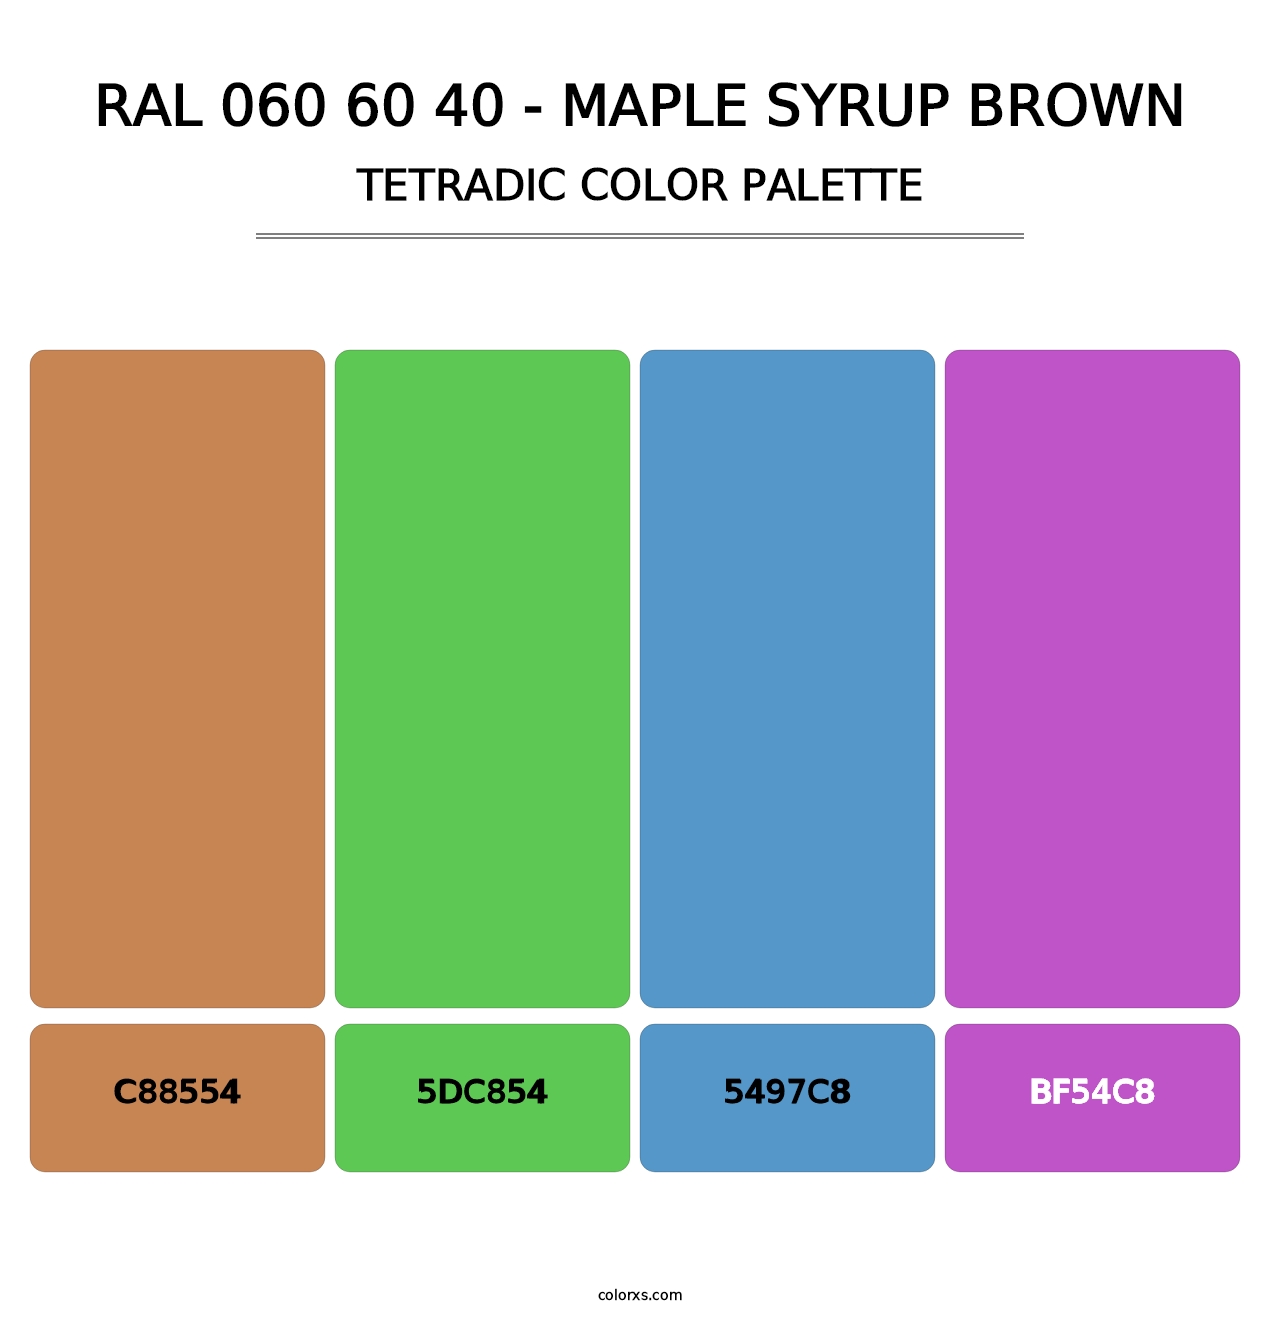 RAL 060 60 40 - Maple Syrup Brown - Tetradic Color Palette